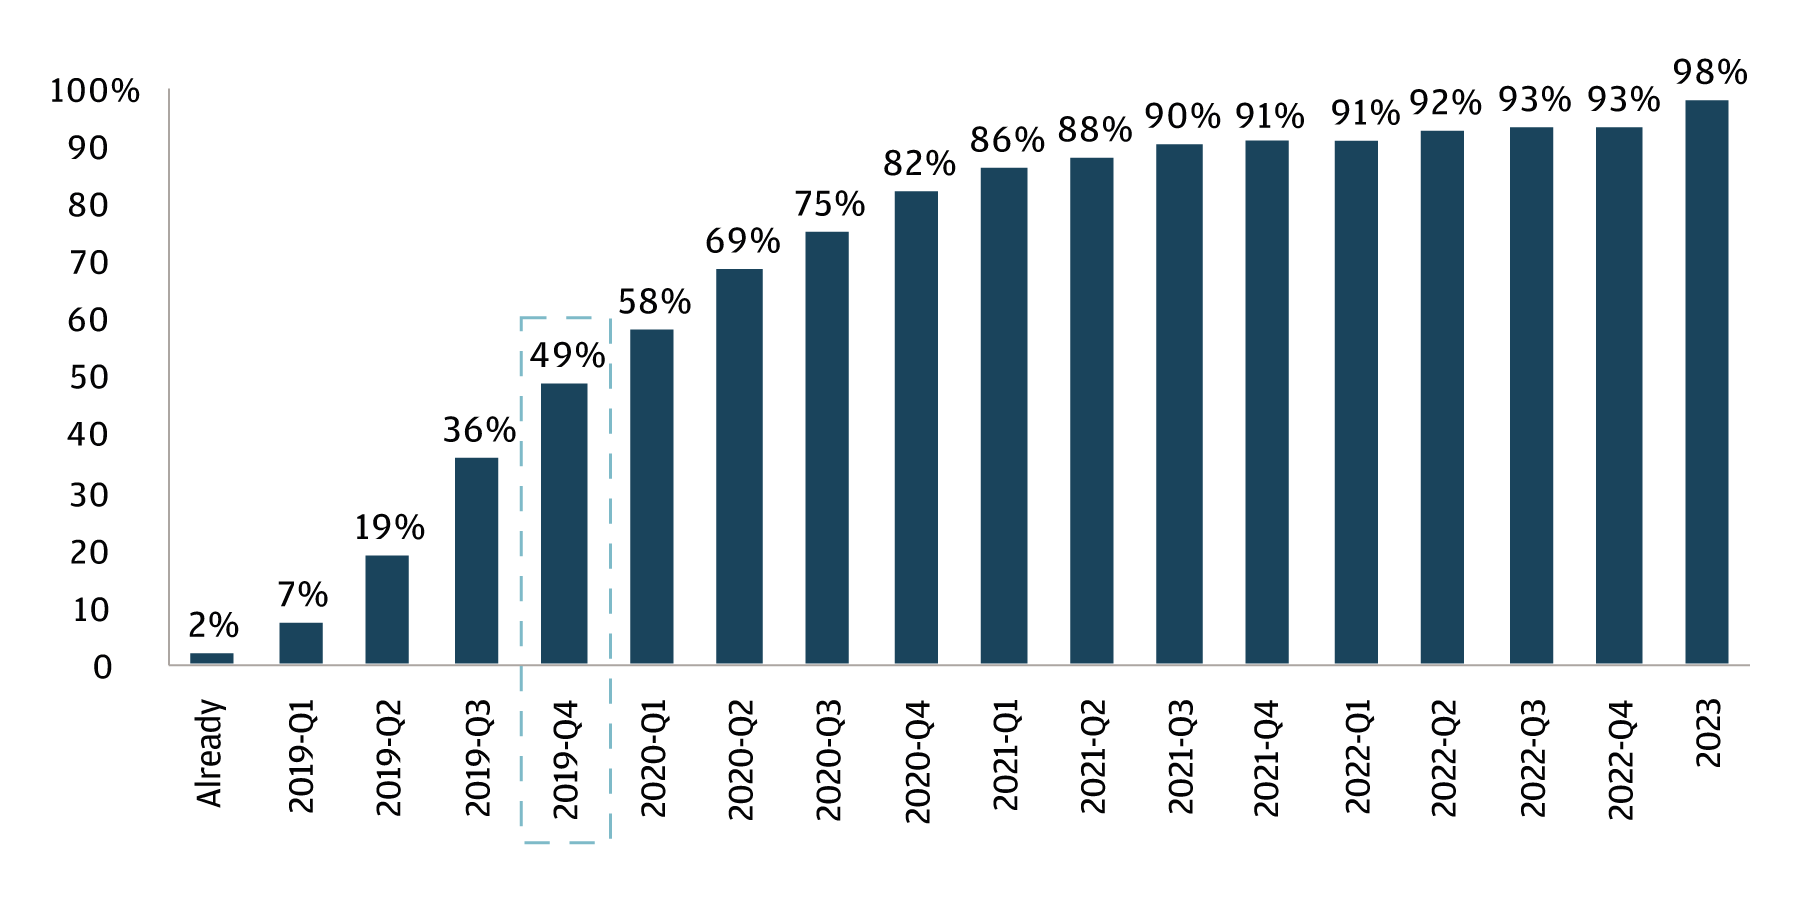 A bar chart showing when CFOs expect a downturn to occur. The chart incorporates data as of December 31, 2018, with 49% of CFOs expecting a downturn to occur in 4Q-2019. 